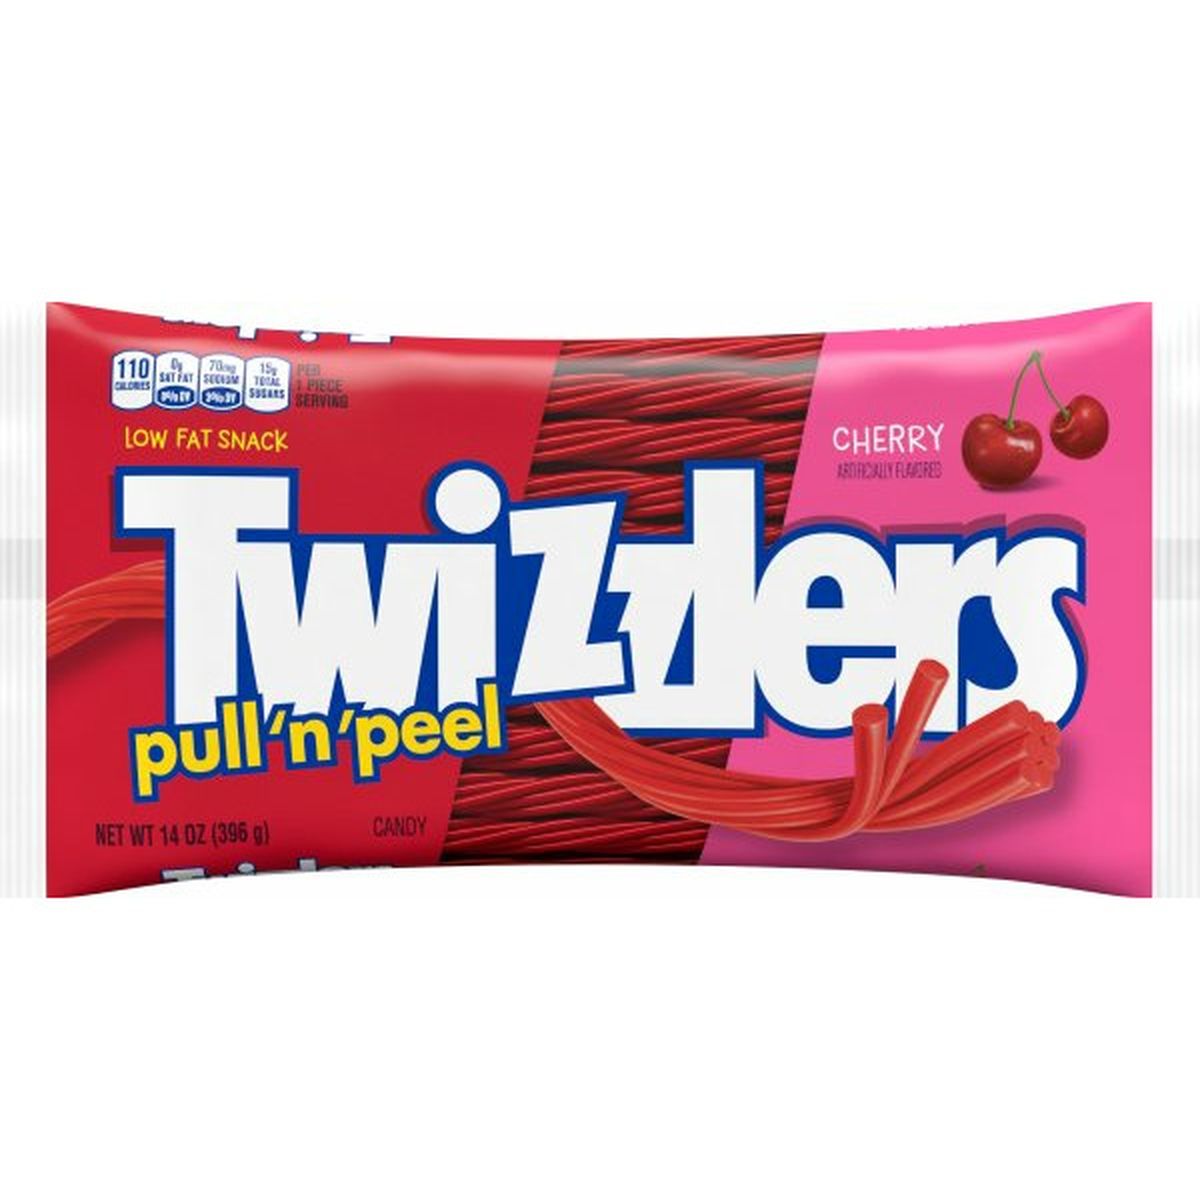 Calories in Twizzlers Candy, Cherry, Pull 'n' Peel